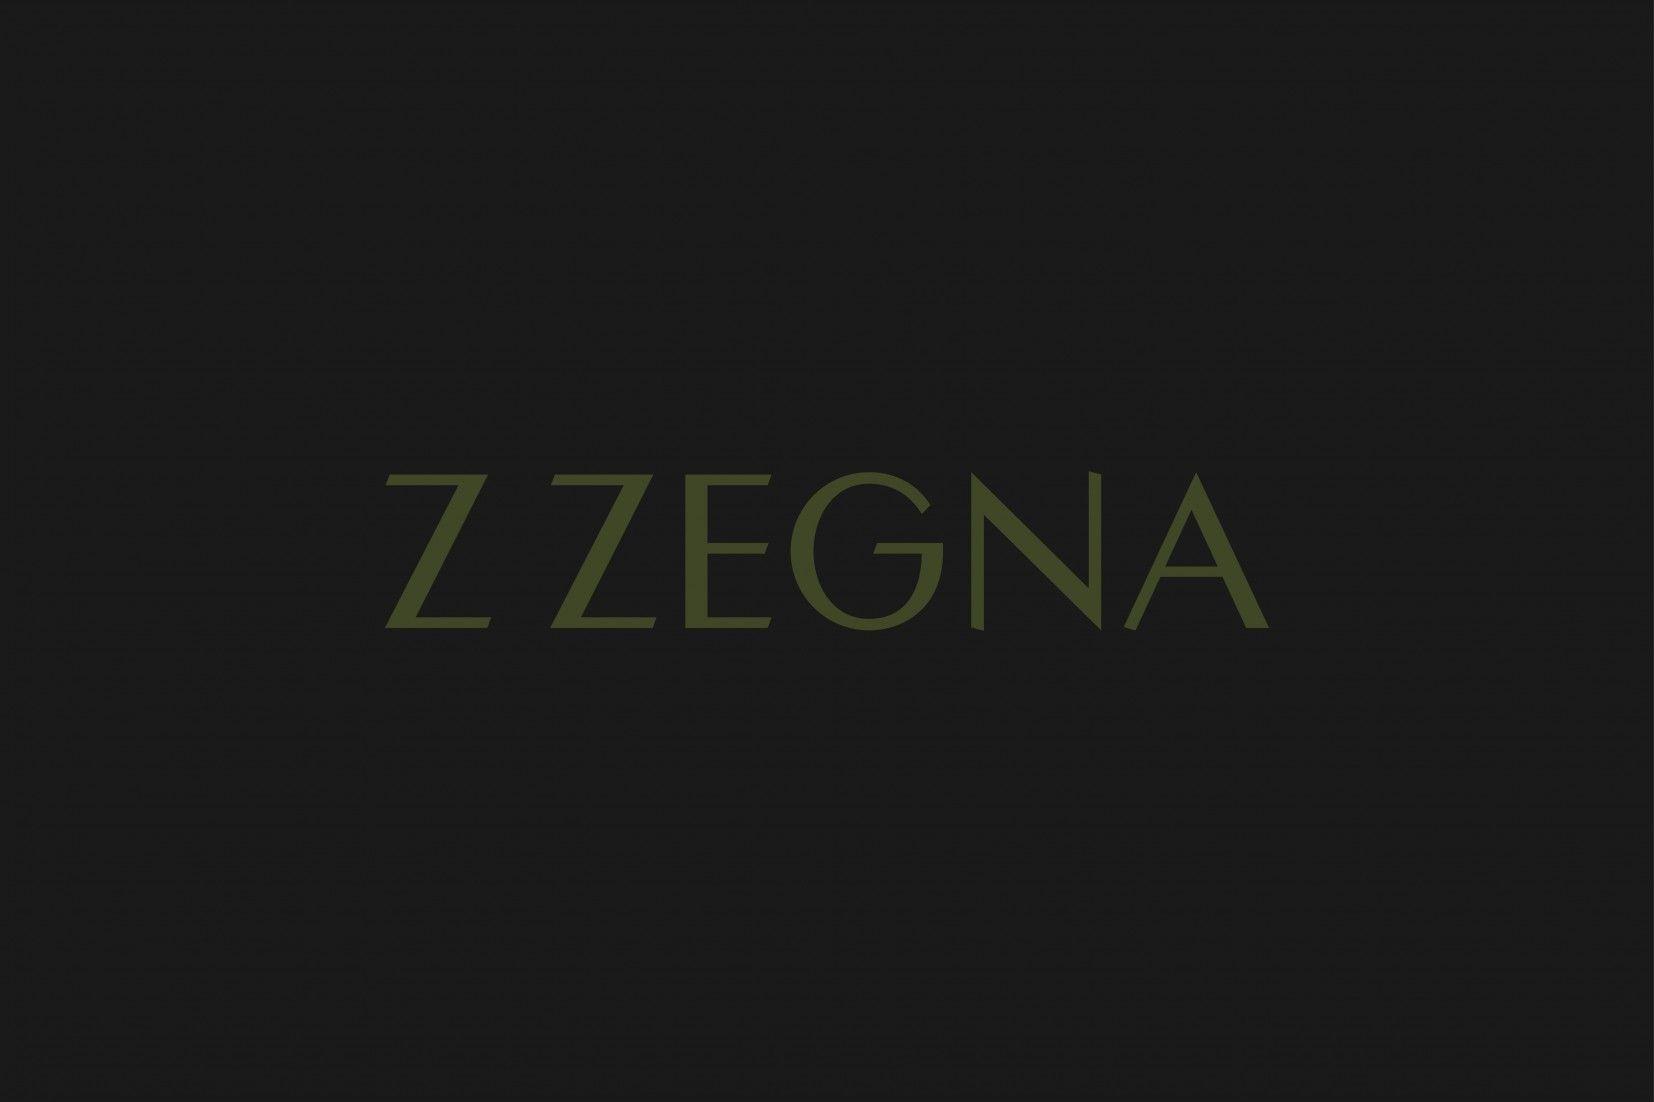 Zegna Logo - Z Zegna – Out There